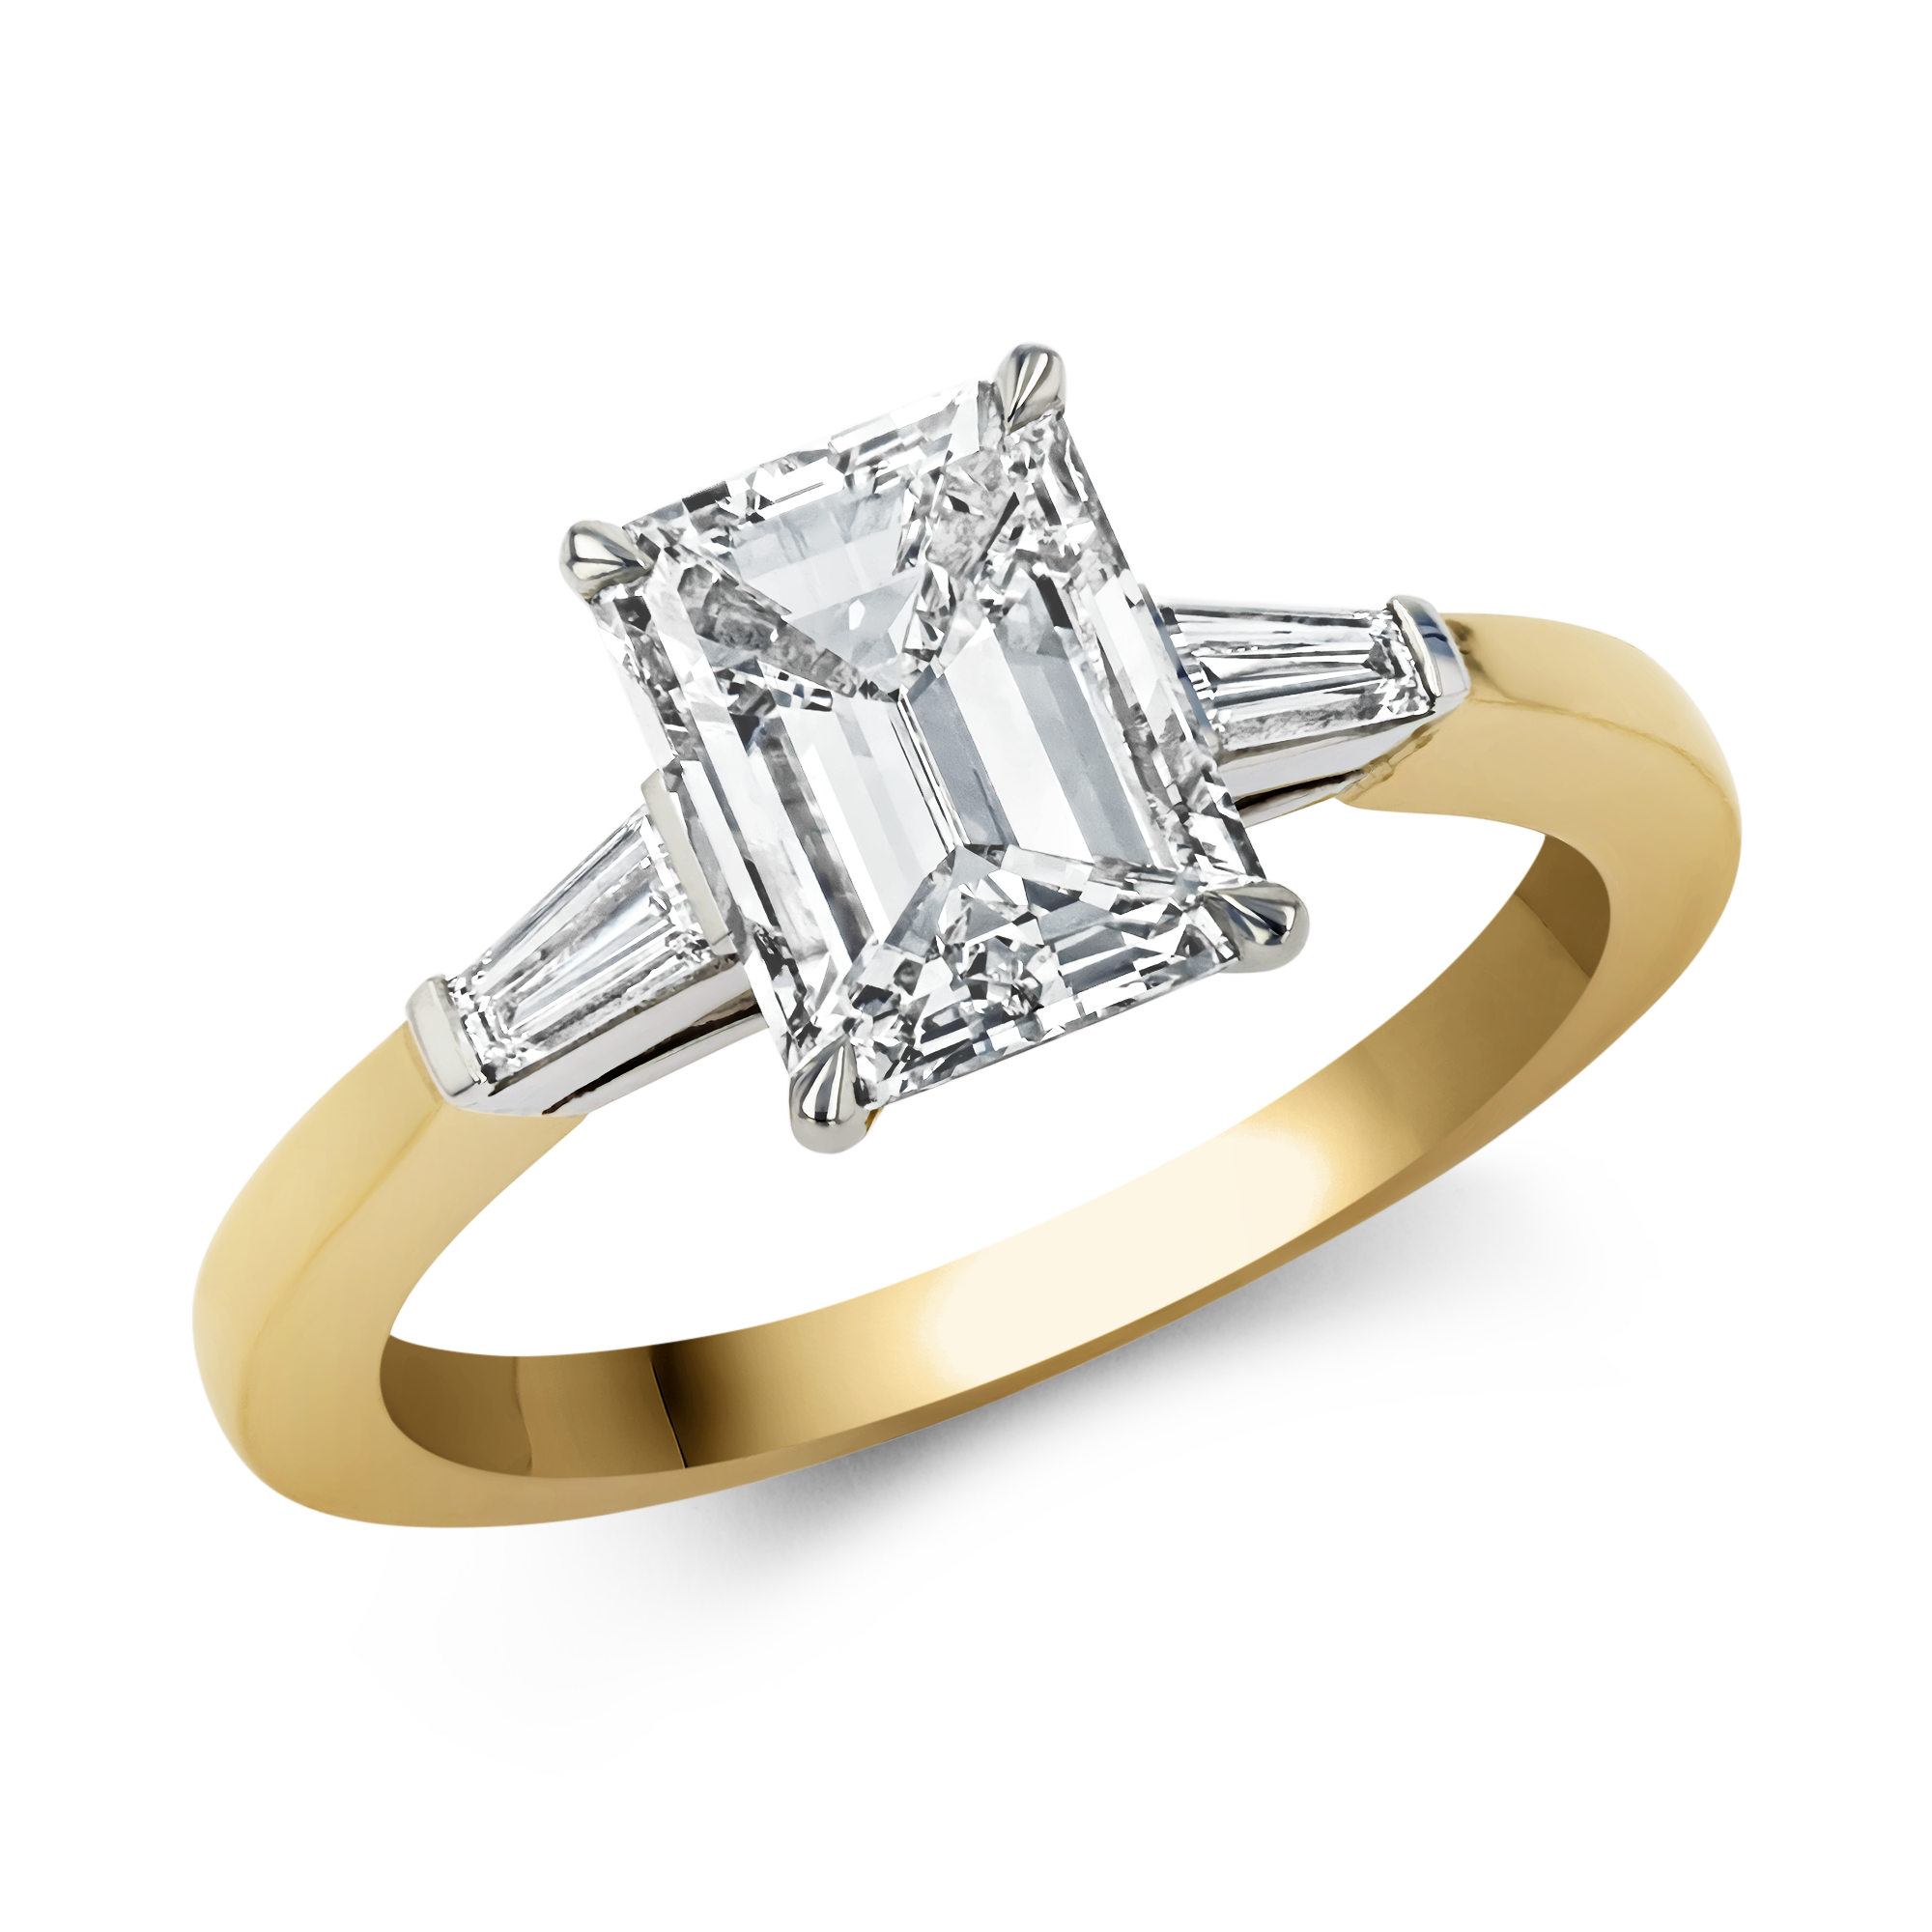 Regency 2.01ct Diamond Solitaire Ring Emerald Cut, Claw Set_1